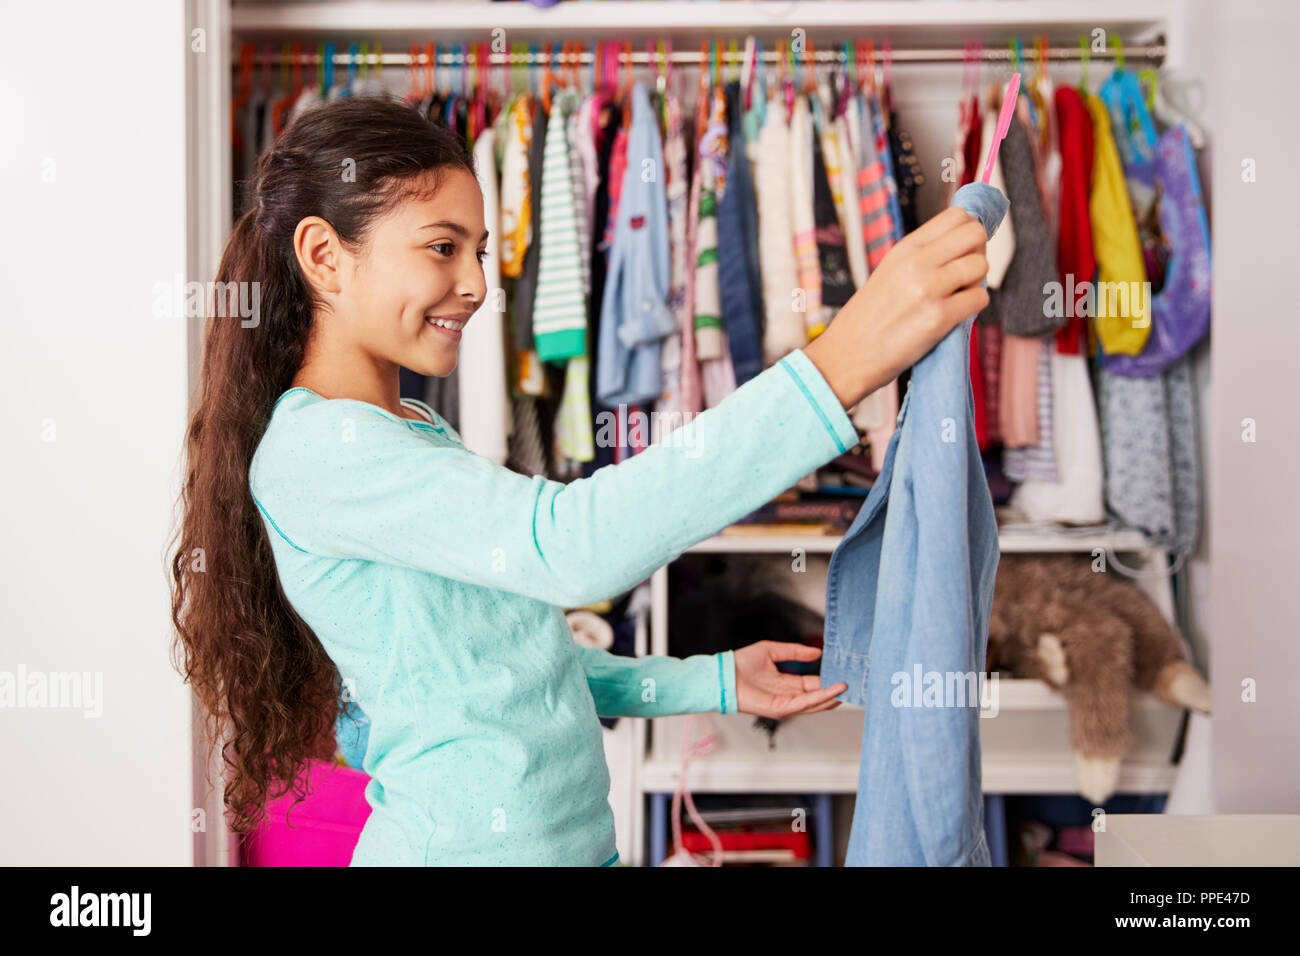 Young Girl In Bedroom Choosing Clothes From Closet Stock Photo